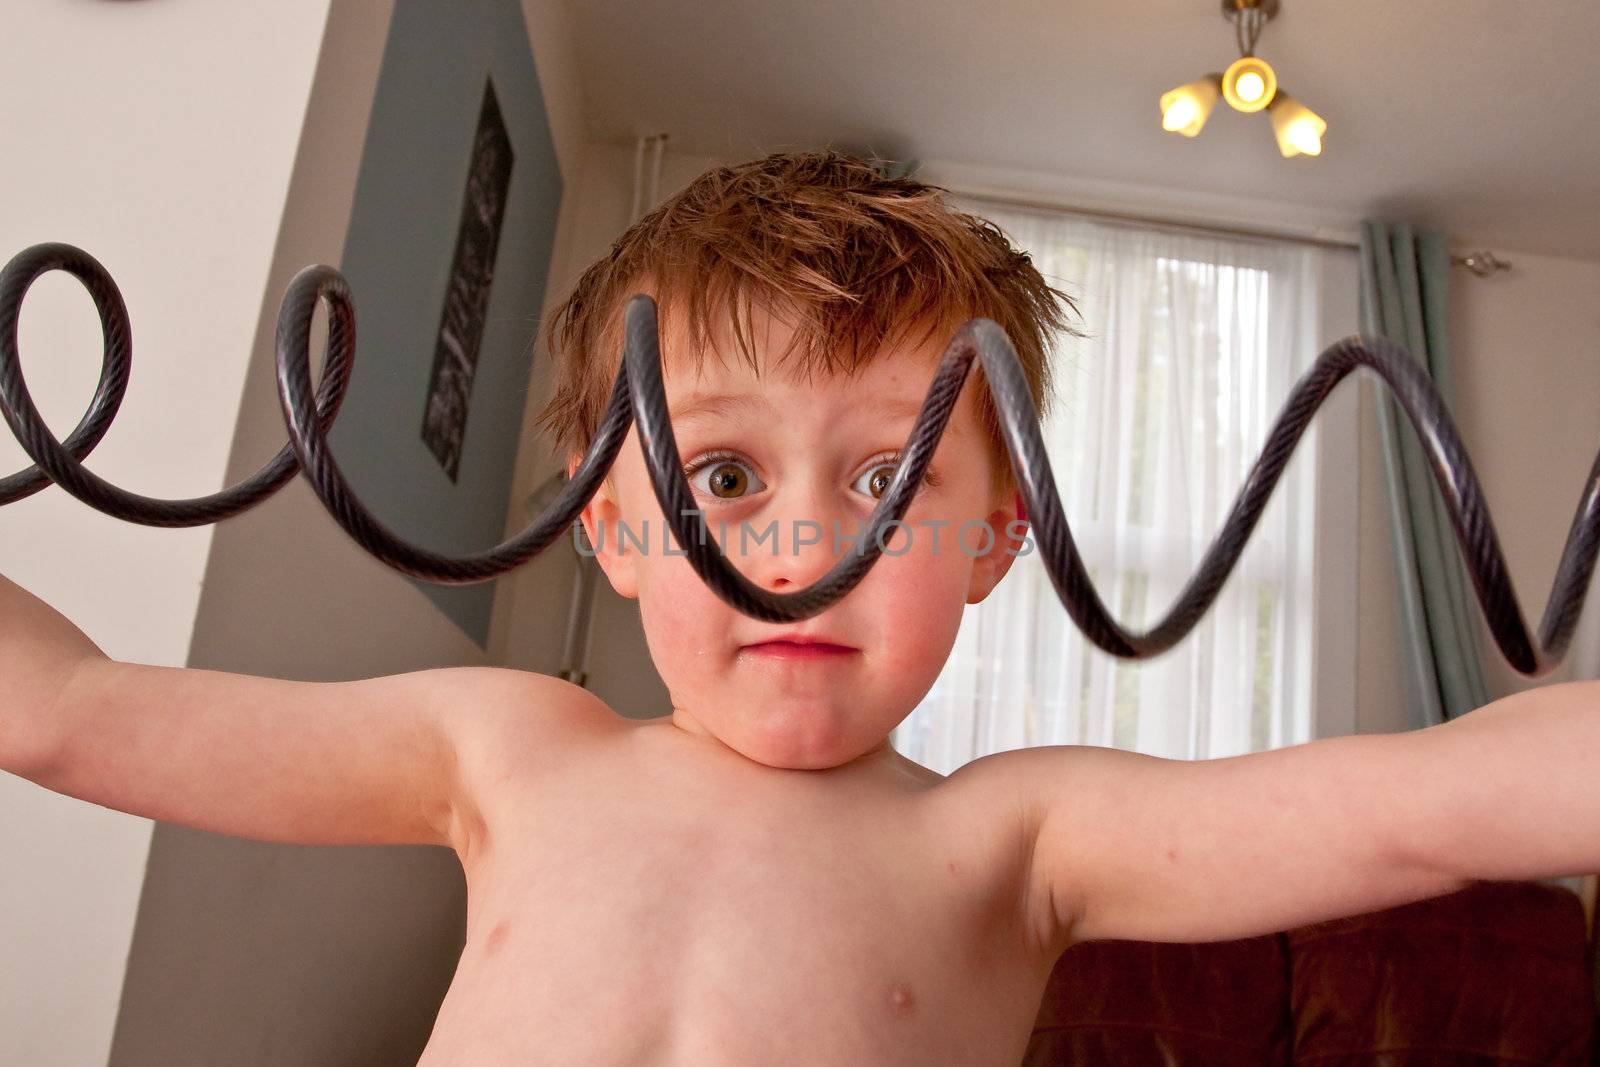 A young boy stretches a coiled bike lock pretending to work out!